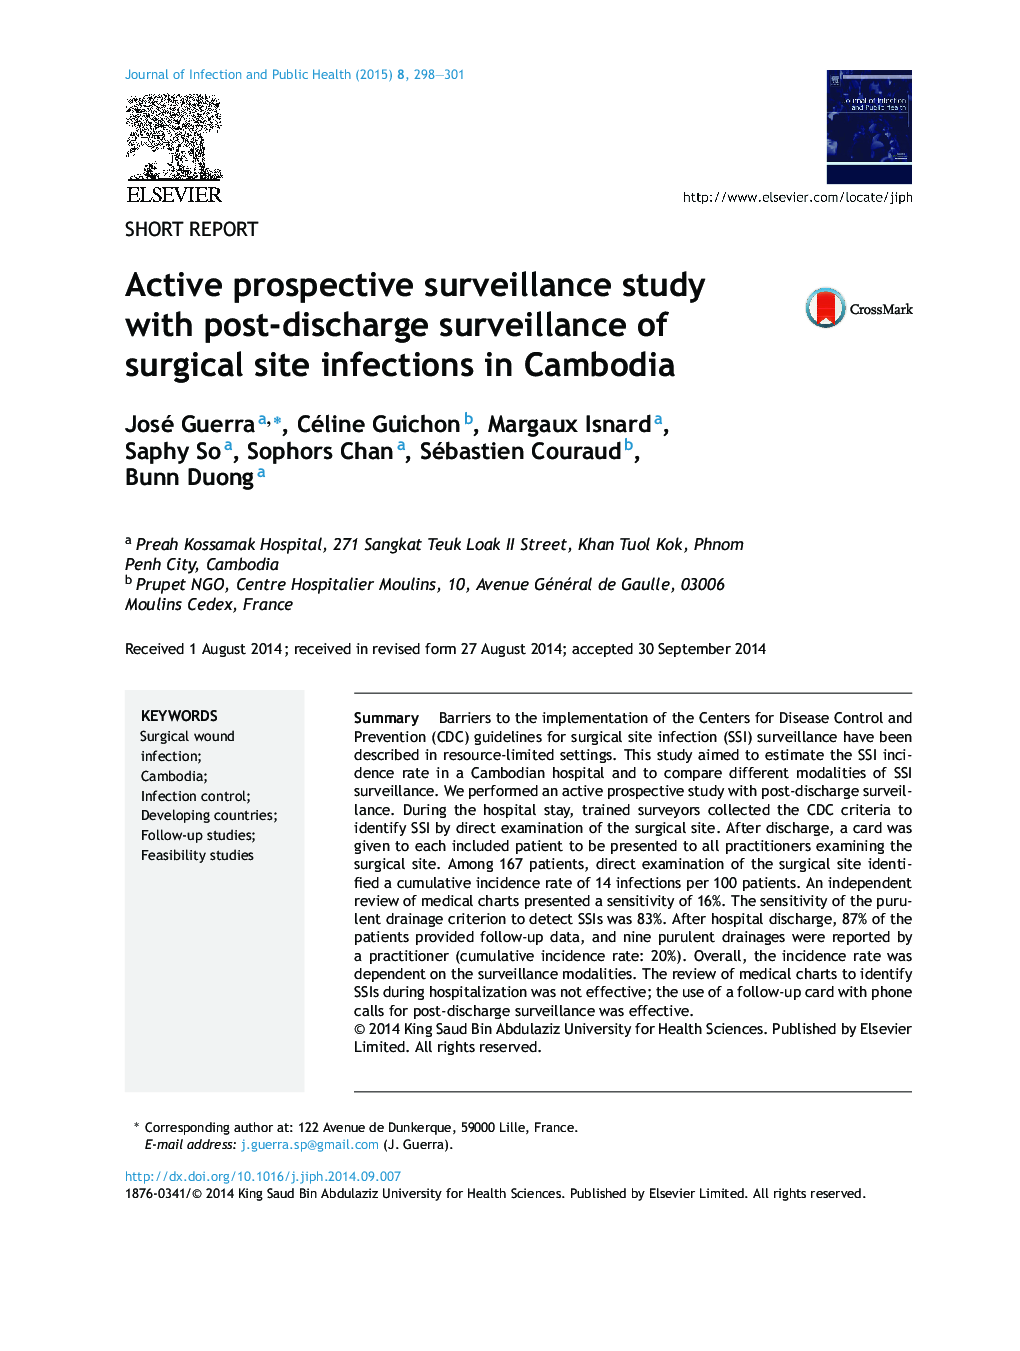 Active prospective surveillance study with post-discharge surveillance of surgical site infections in Cambodia